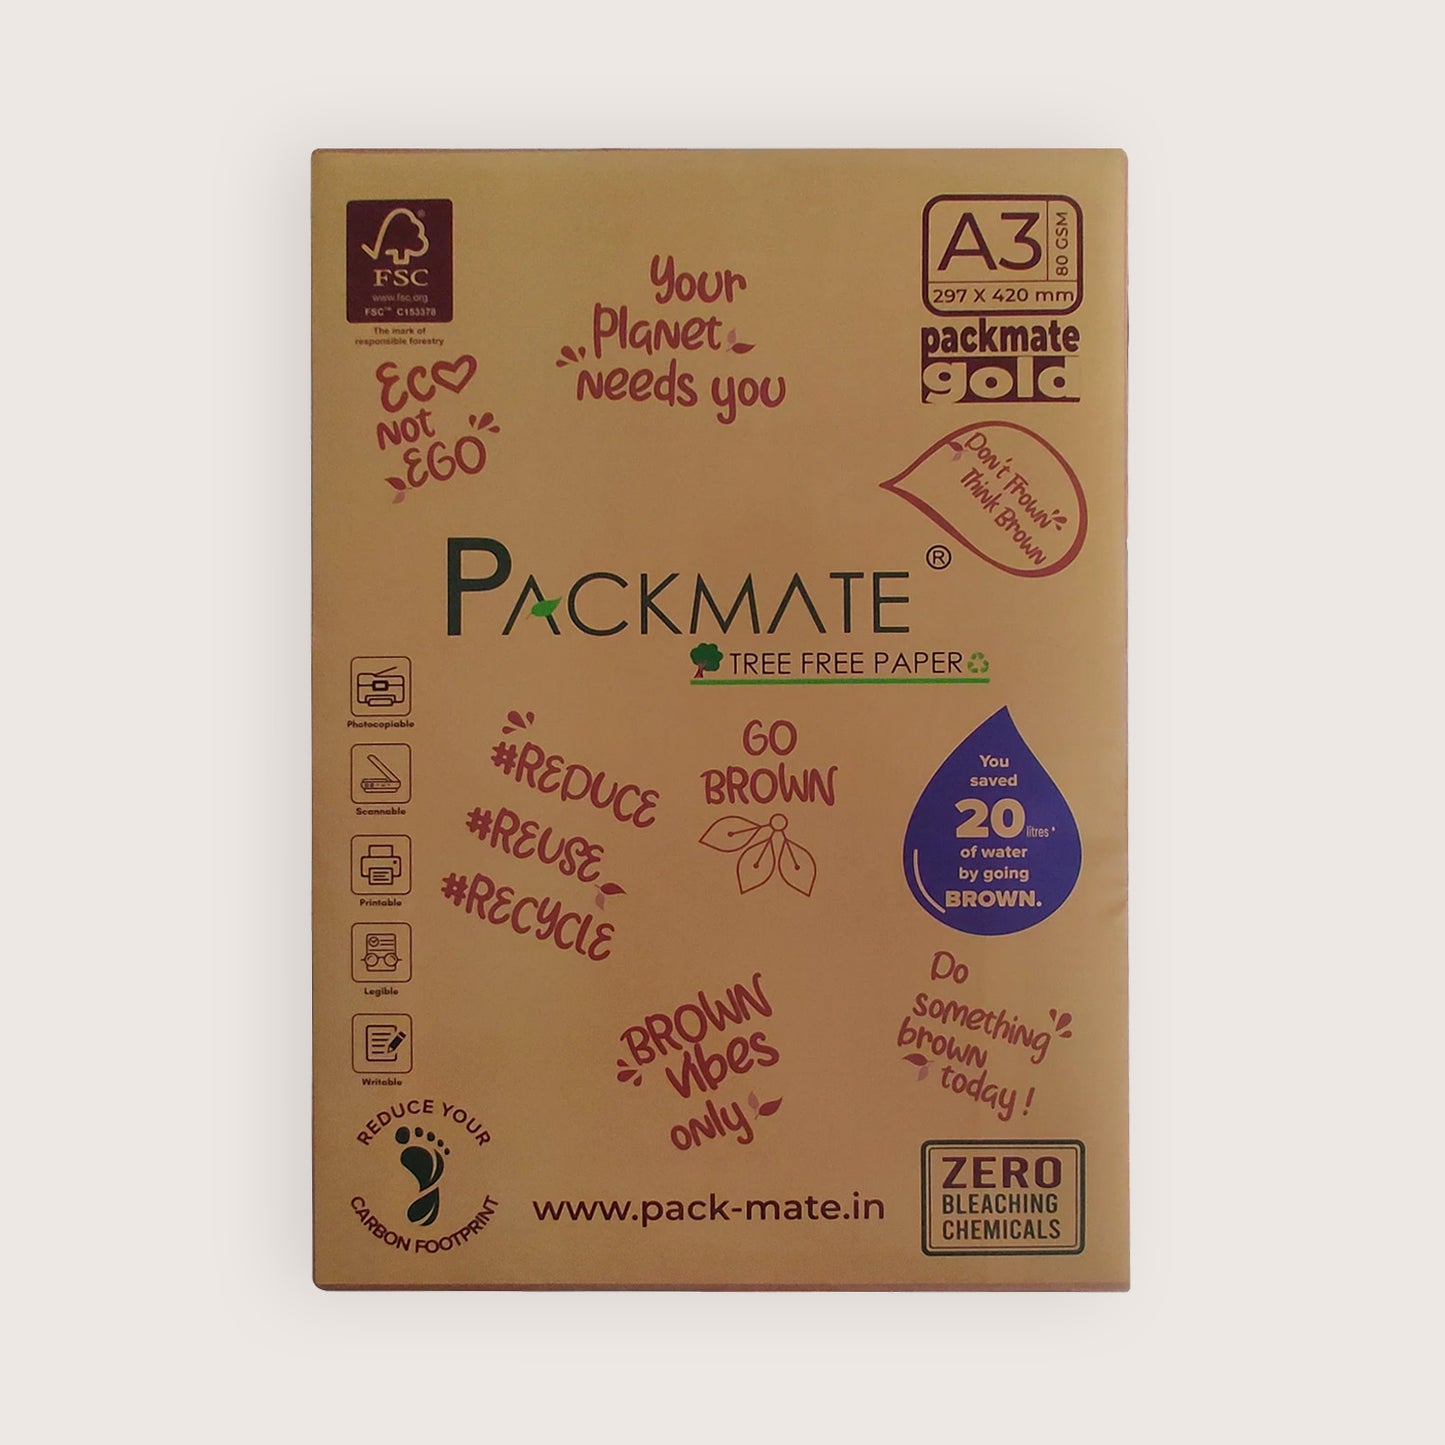 Packmate Gold Copier - A3, 1 Ream, 500 Sheet |  Made From 100% Recycled Paper